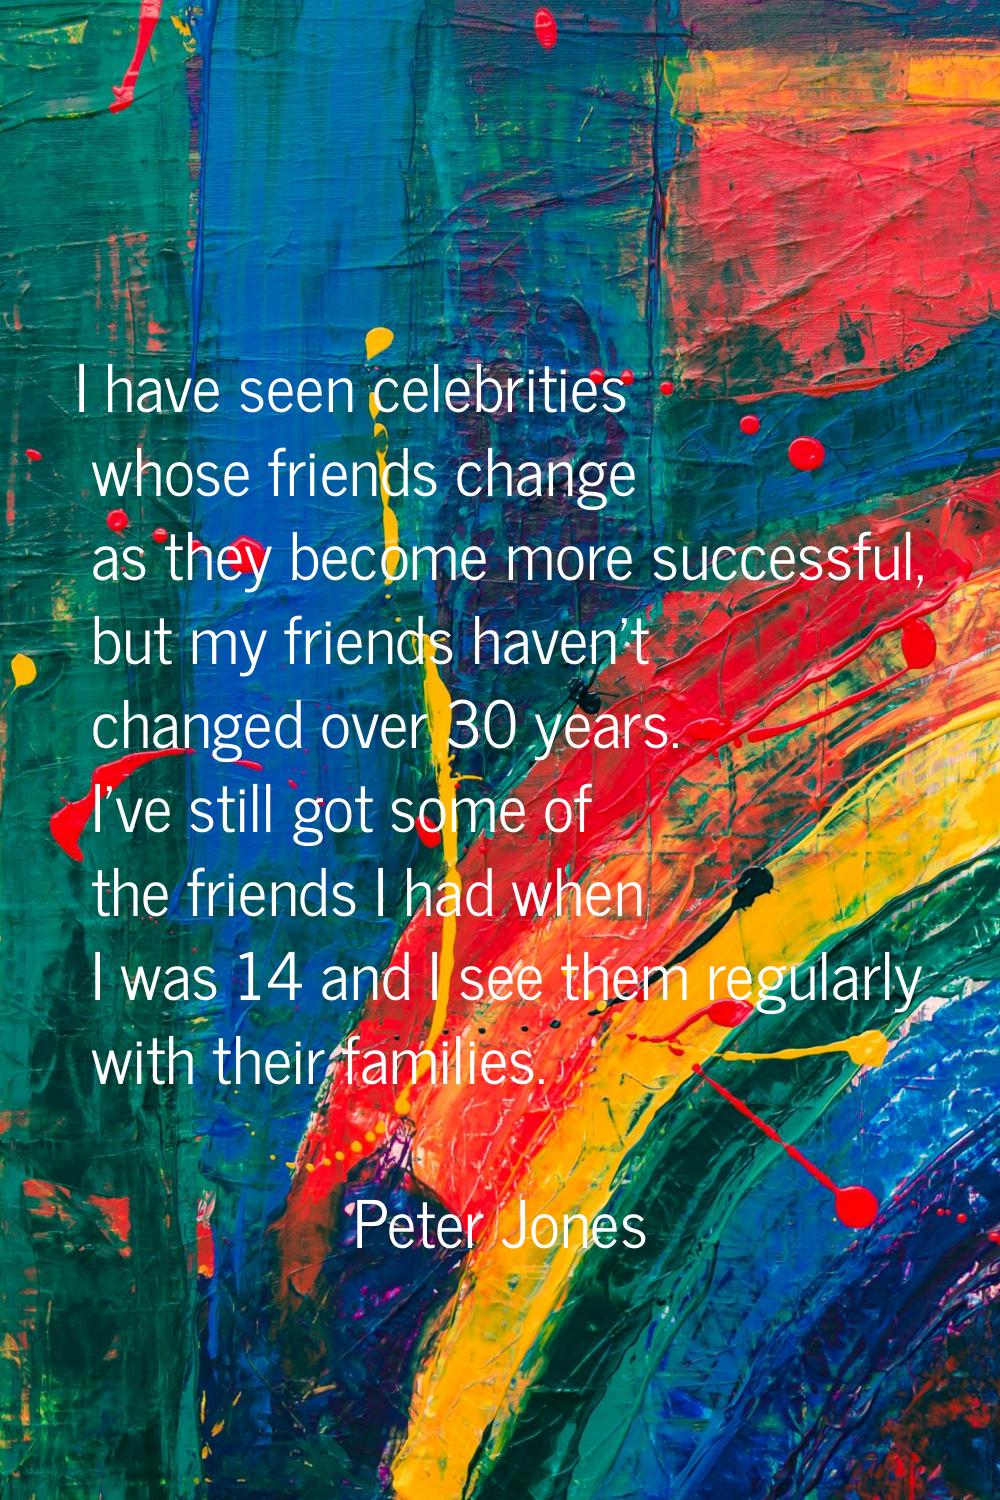 I have seen celebrities whose friends change as they become more successful, but my friends haven't